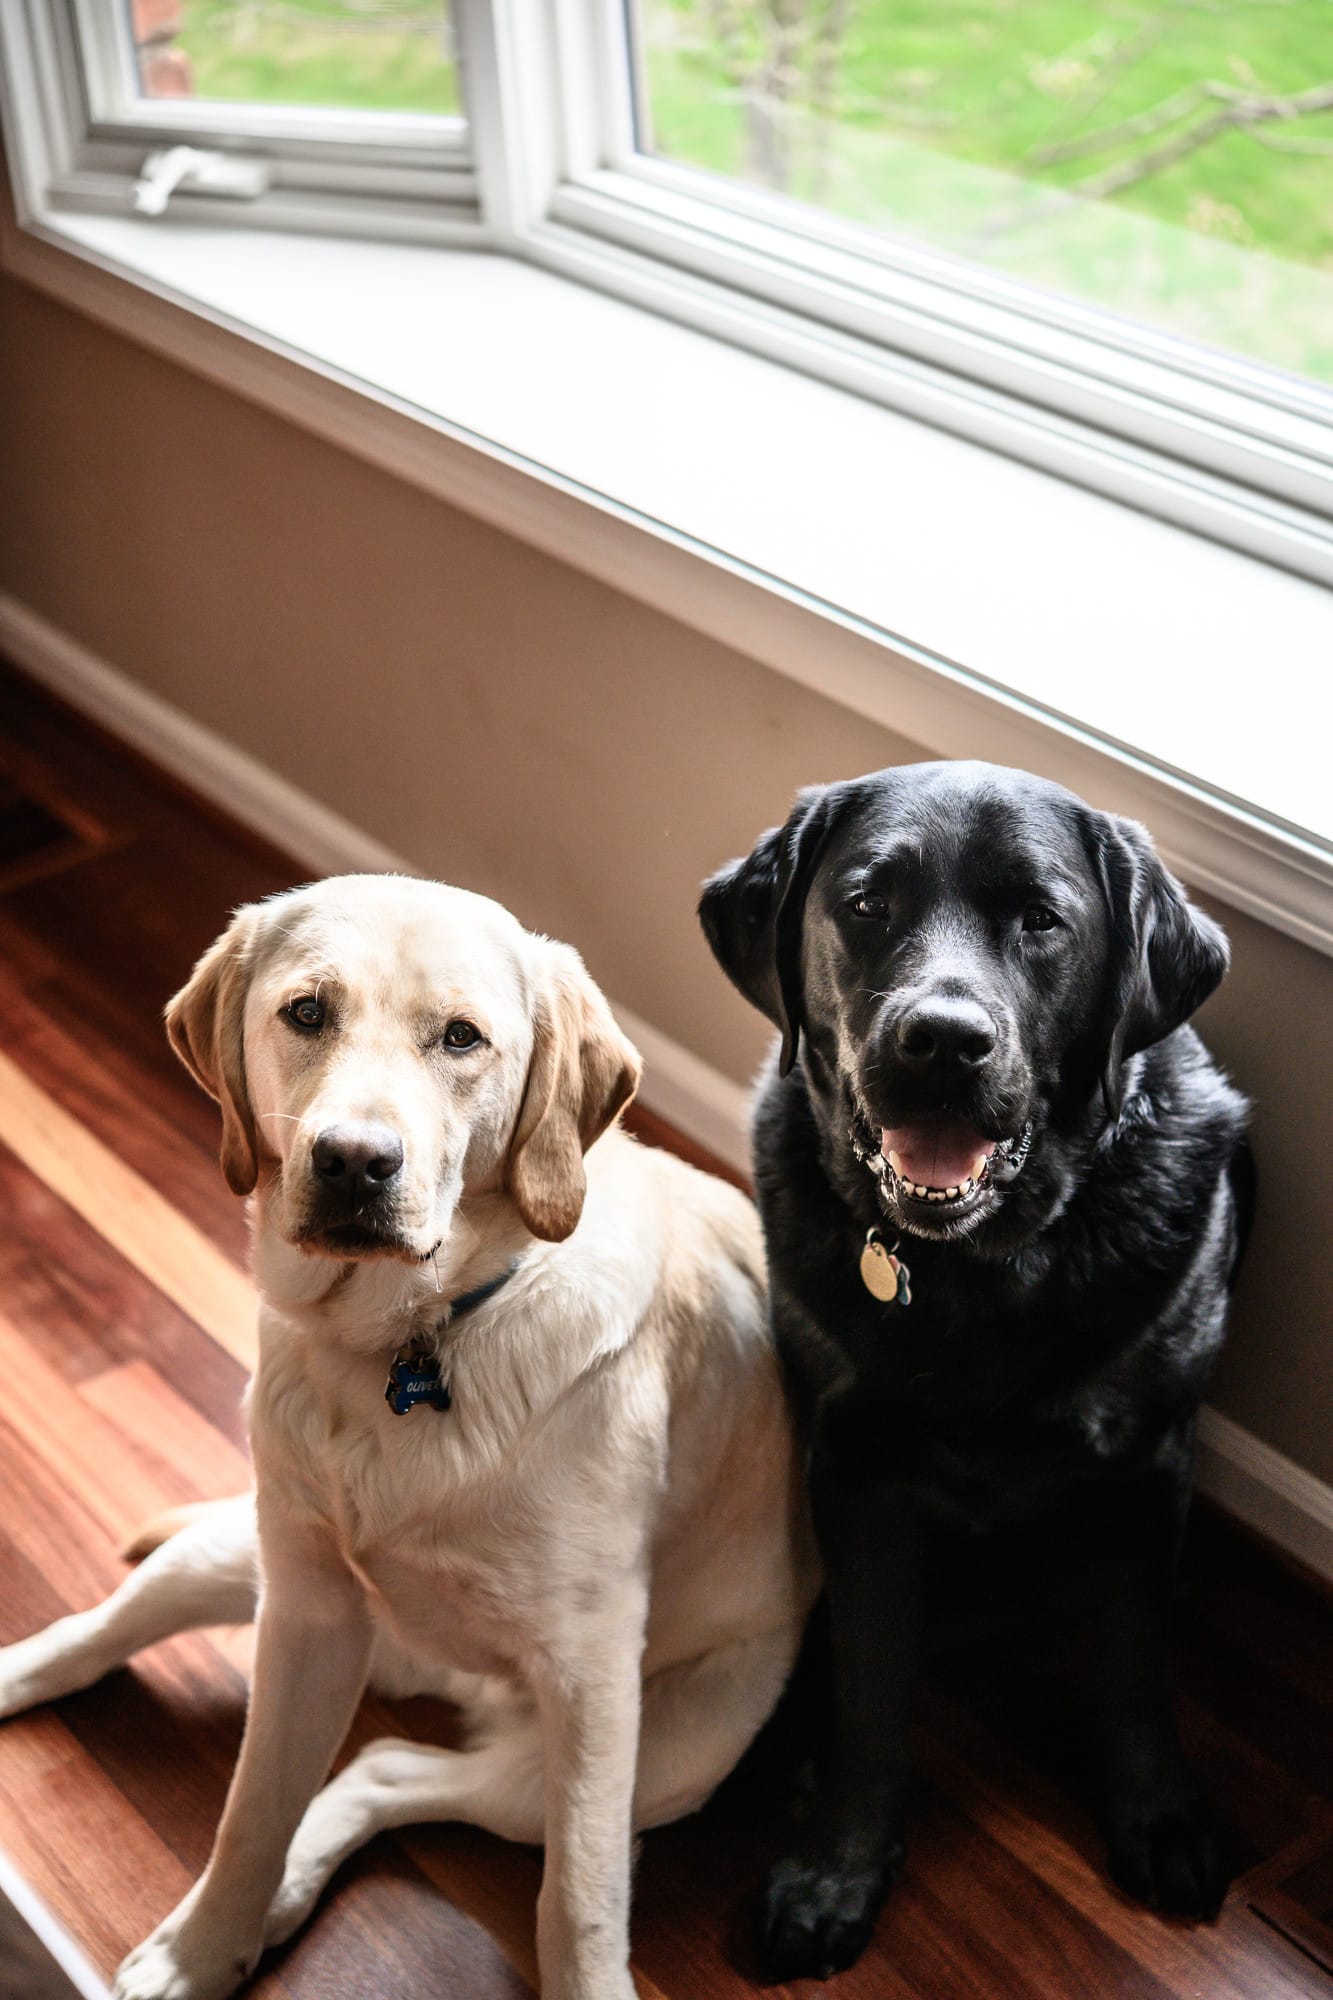 A yellow lab and black lab sitting next to each other in kitchen